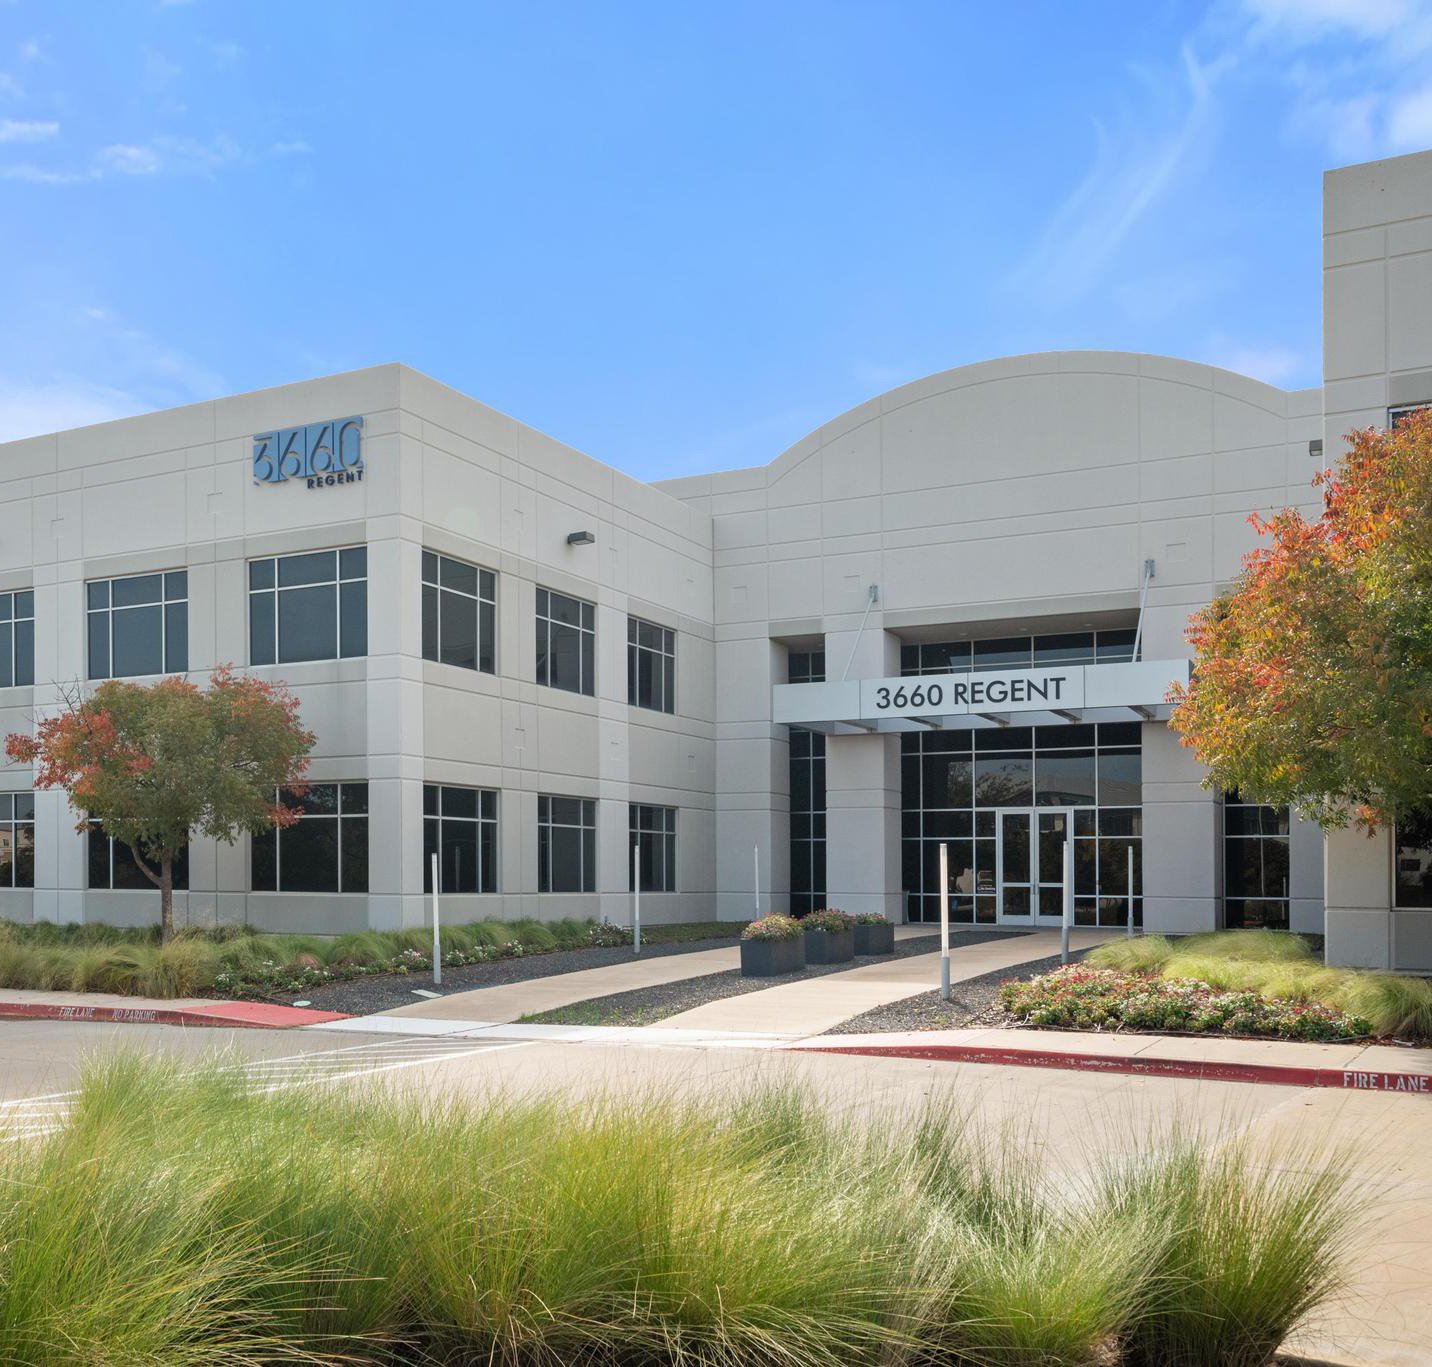 Acquire BPO Opens U.S. Headquarters in Irving, Texas Assisted by Site Selection Group